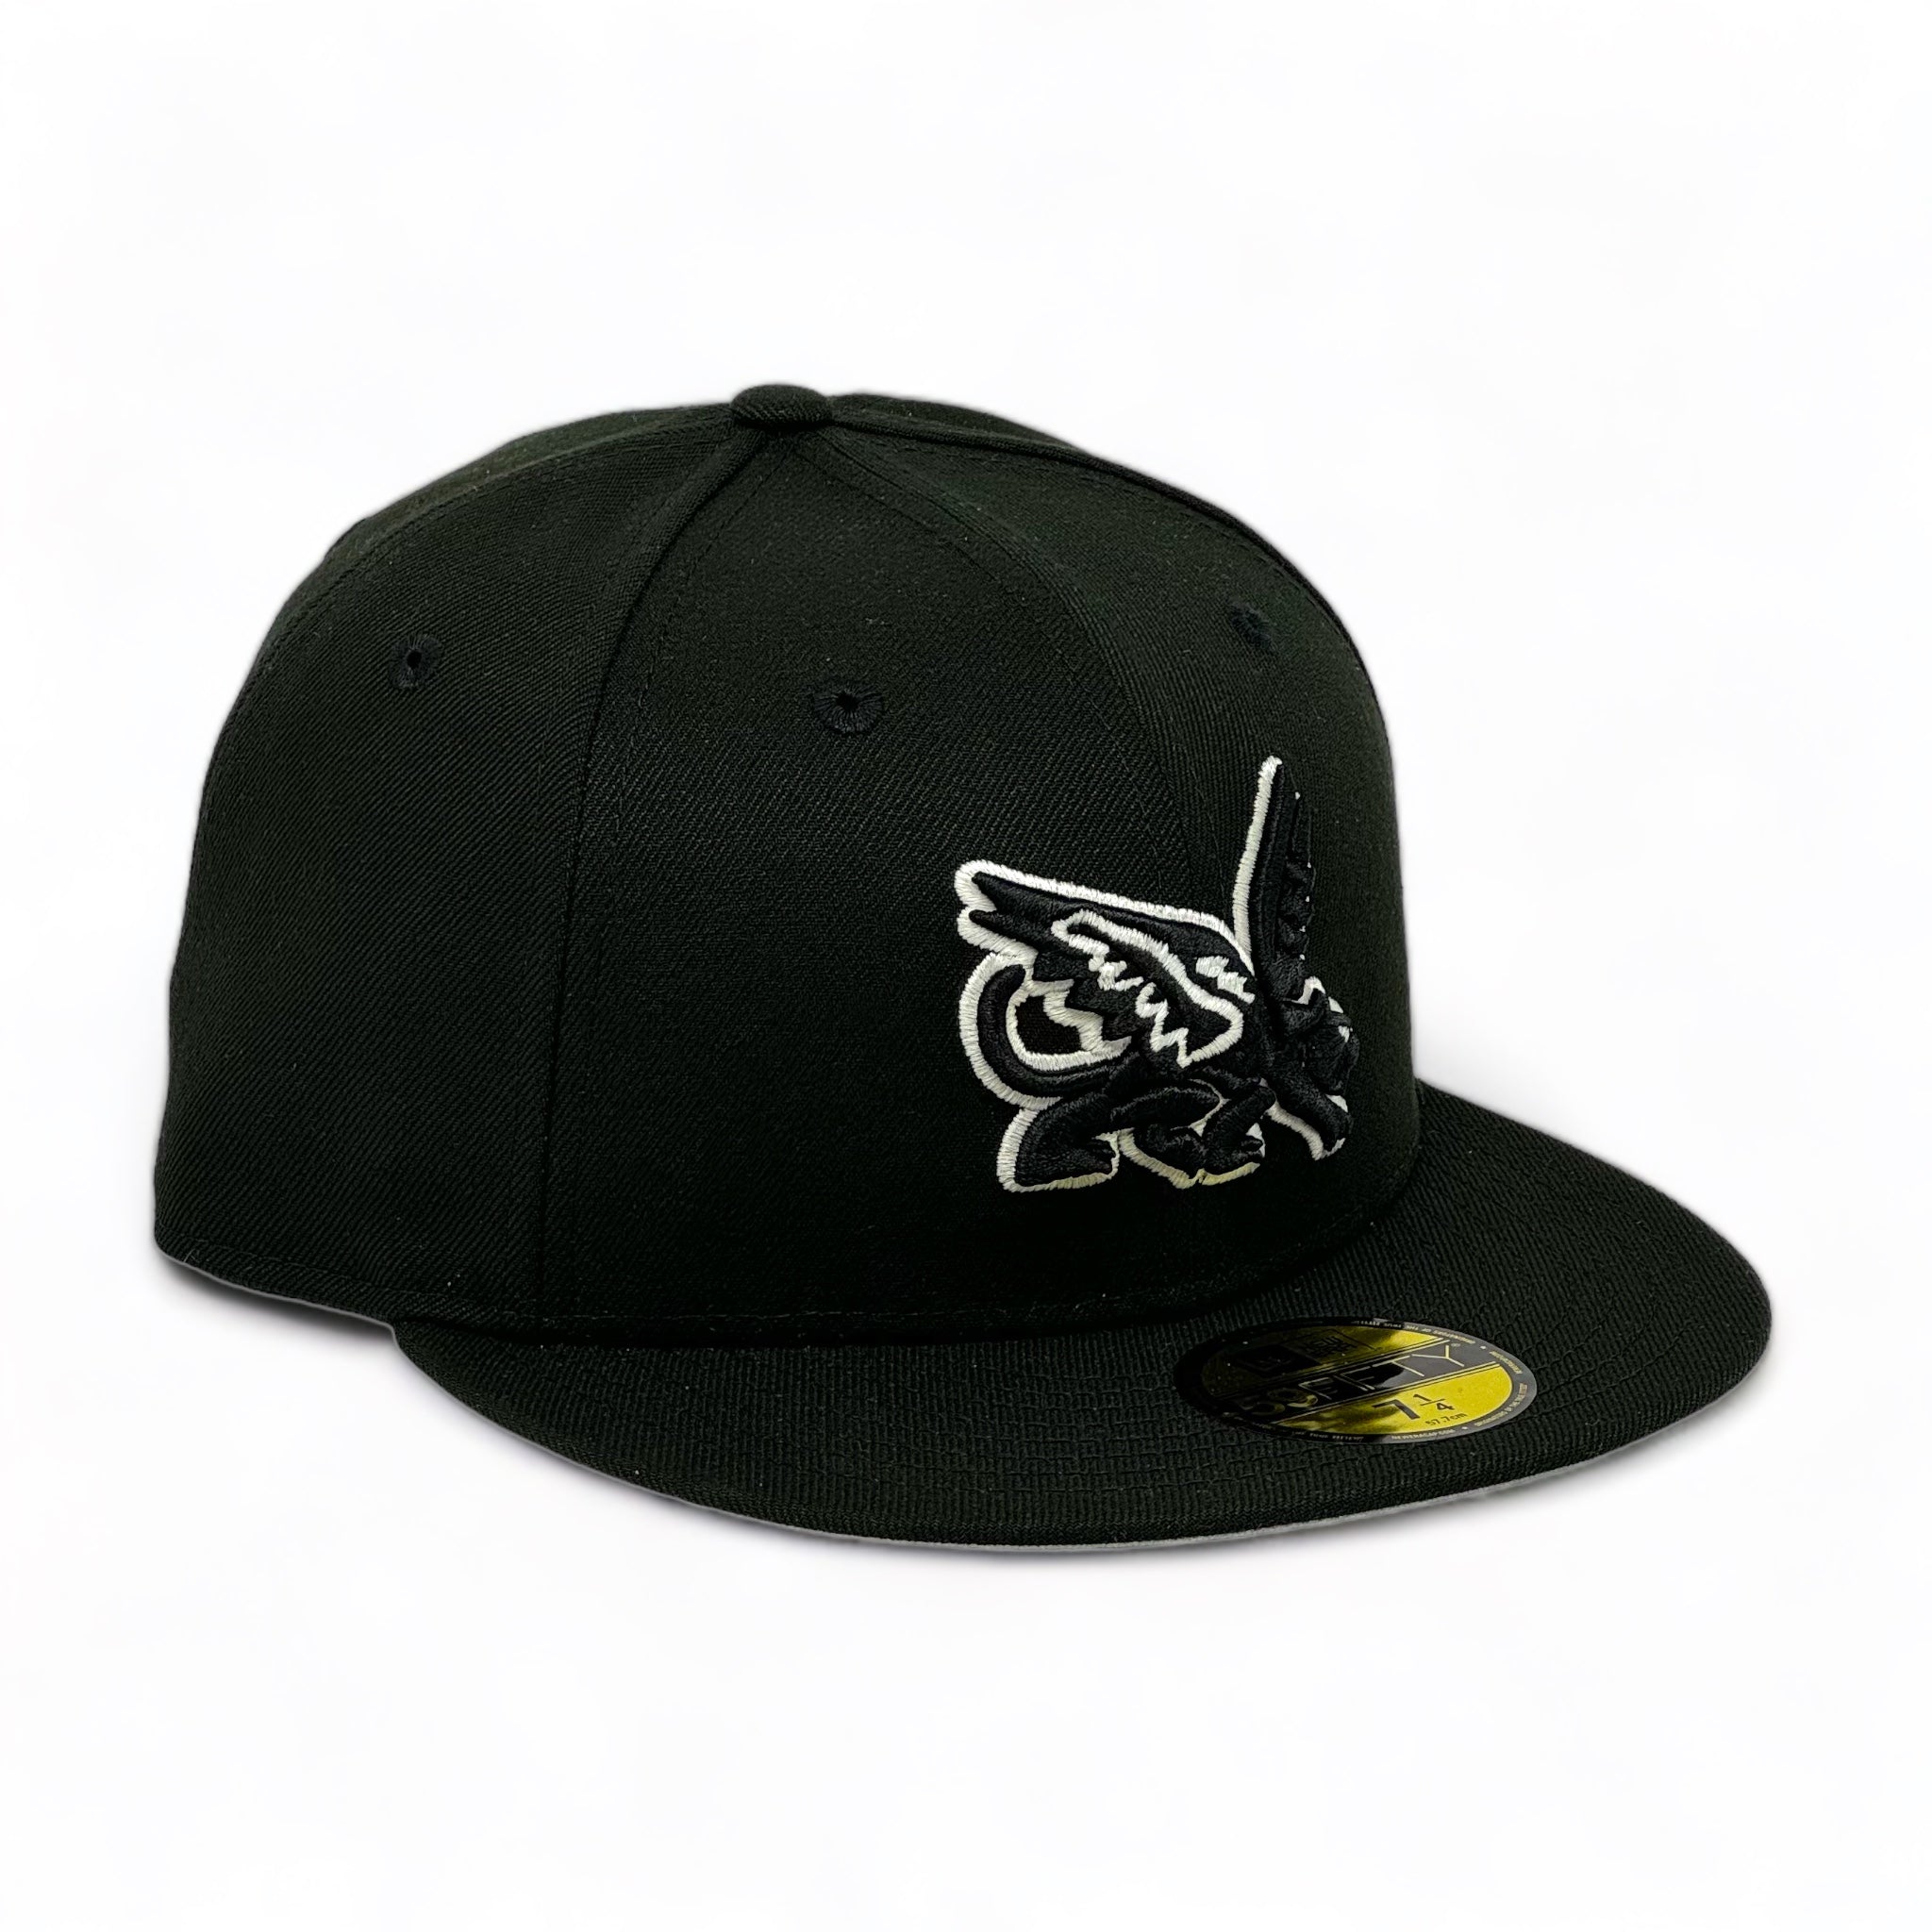 TEXAS RANGERS (BLACK) "CITY CONNECT" GLOW IN THE DARK NEW ERA 59FIFTY FITTED